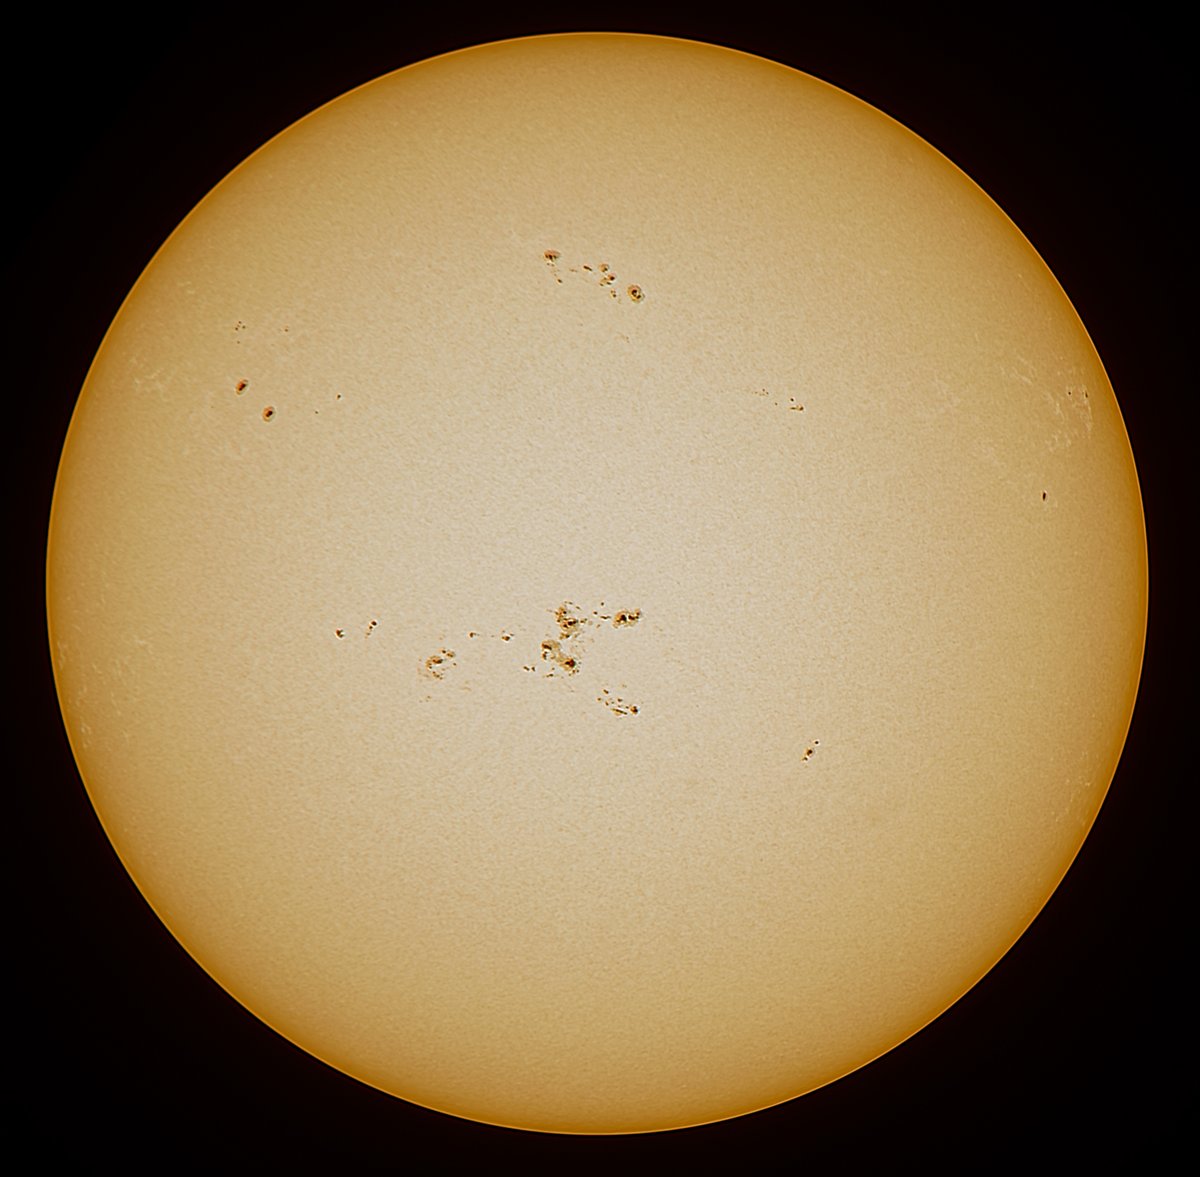 Sun today 19042024 White light safety filter to show photosphere. 14 Active regions with 5 in the centre facing Earth. KP at 5 so aurora are possible tonight. #sun #sunhour #solar #sumspots #astrophotography #astronomy #space #stormhour #thephotohour